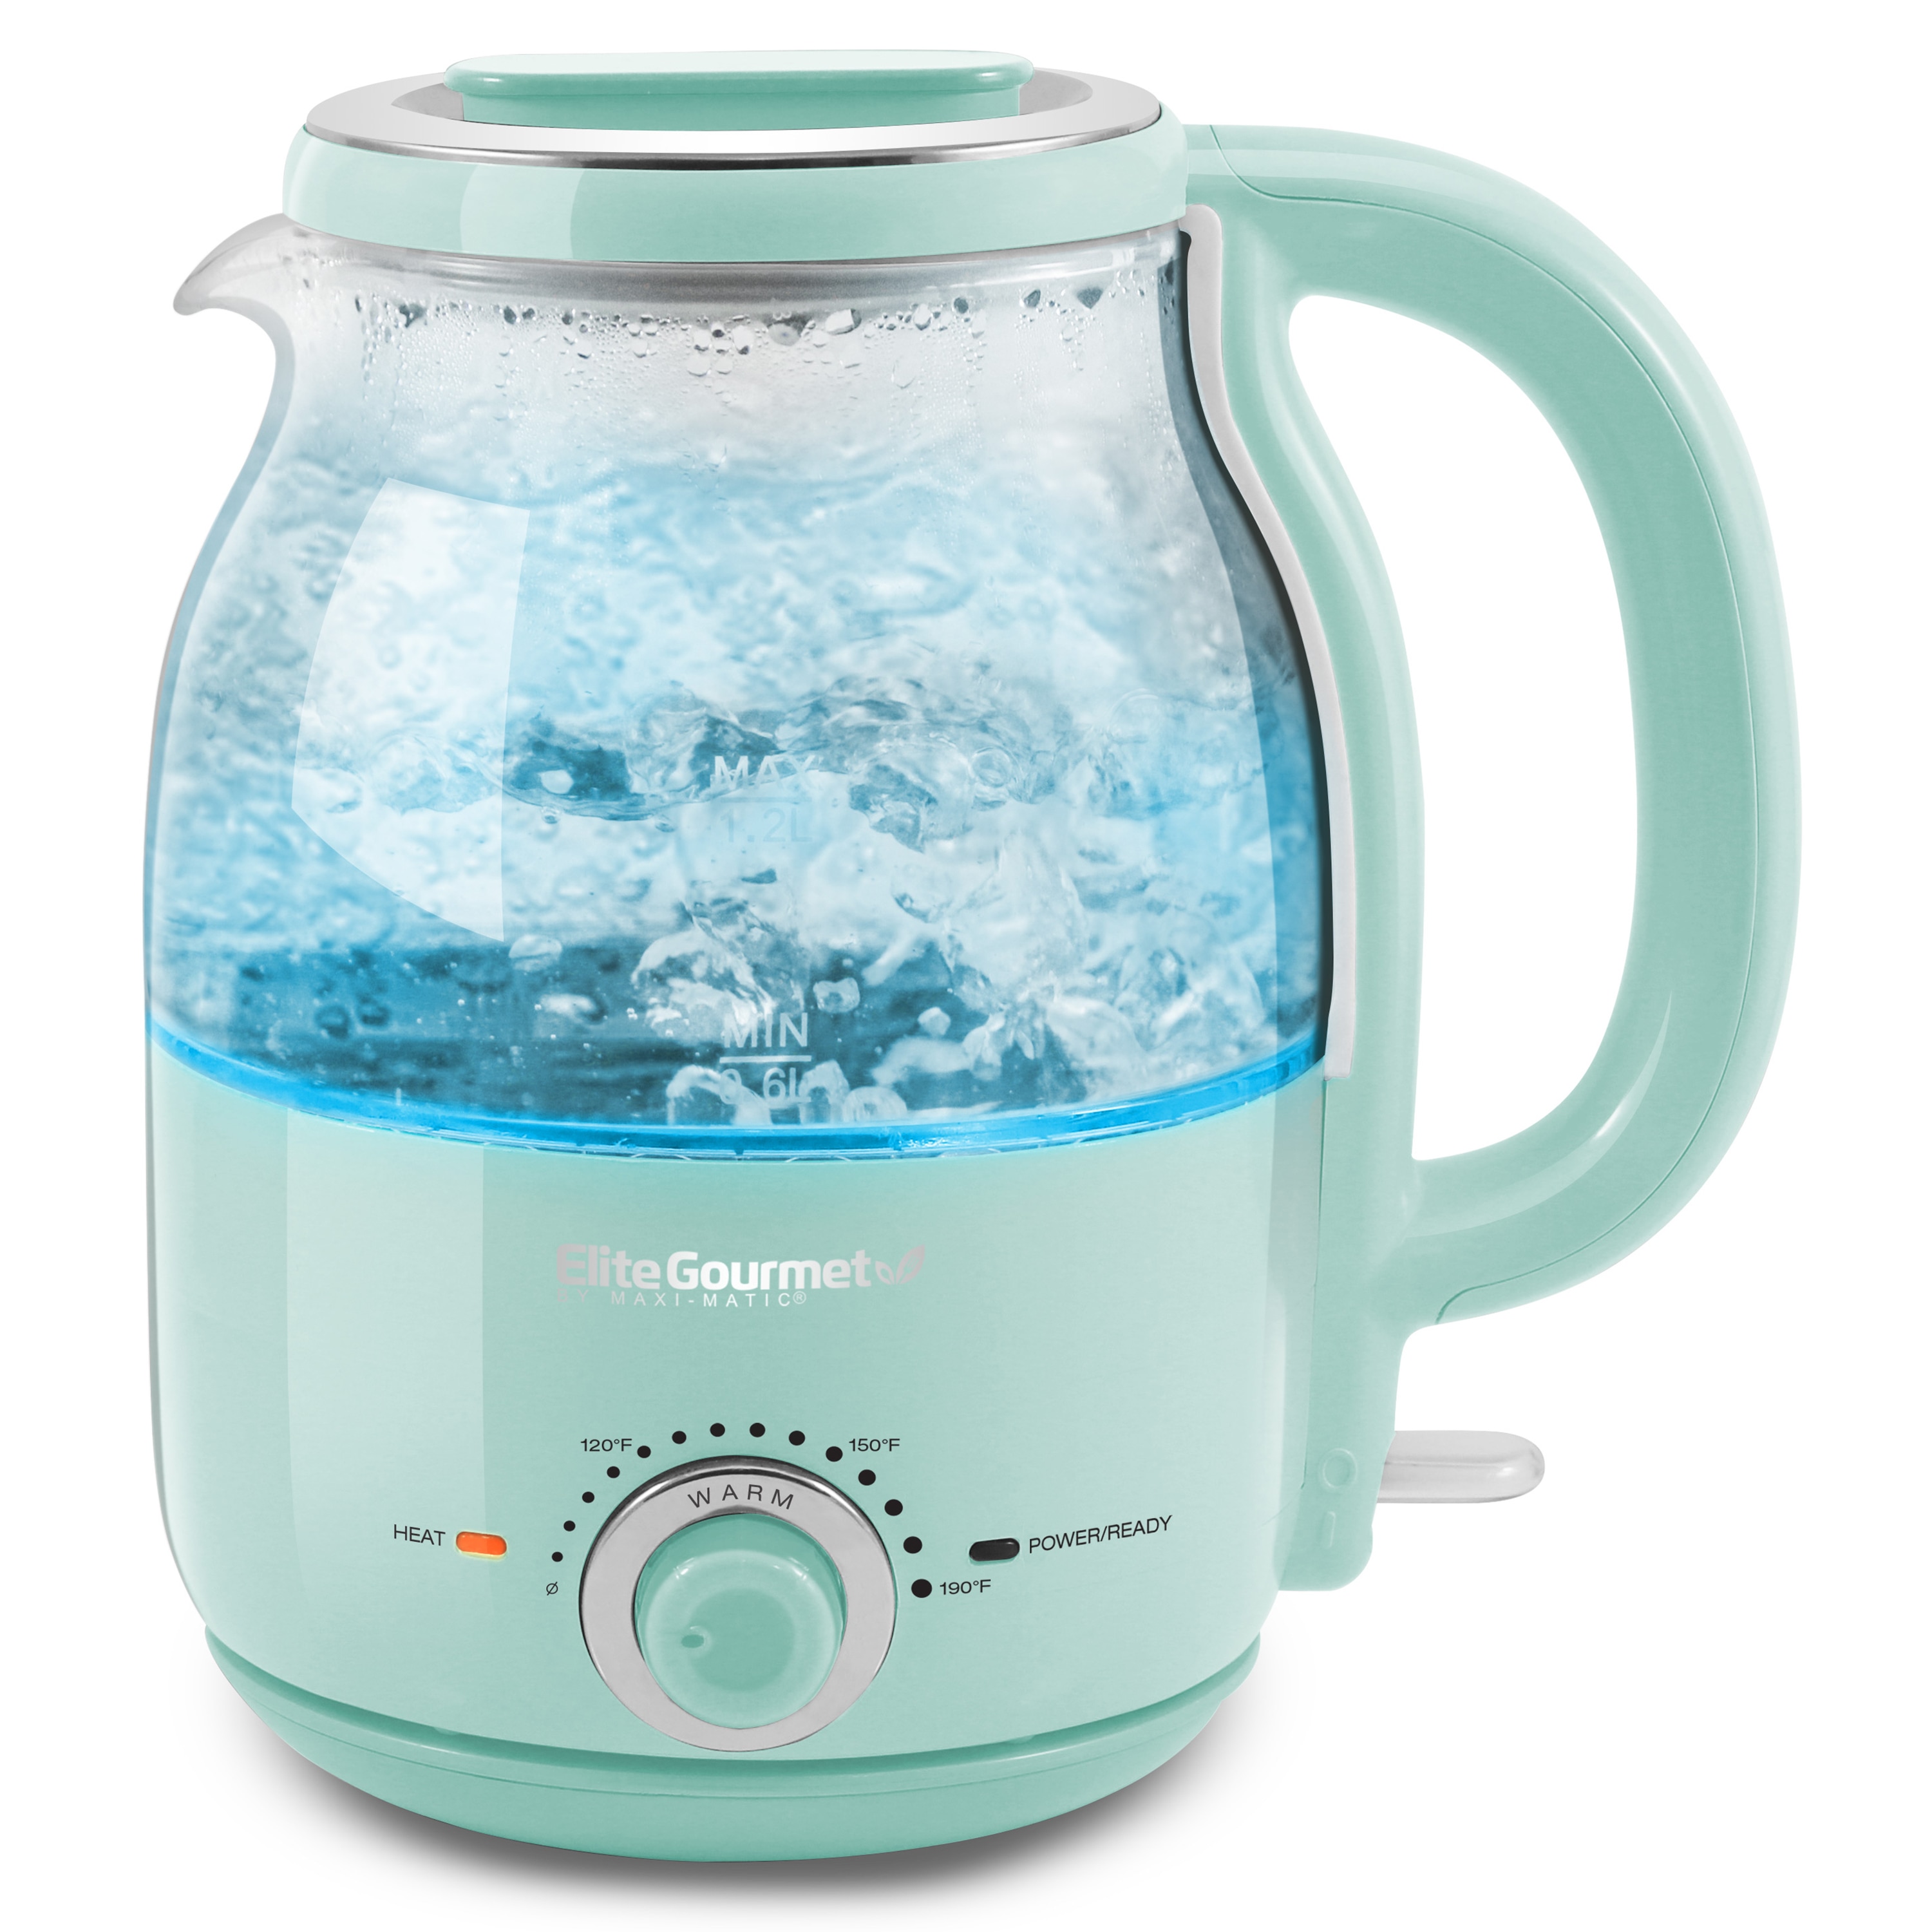 Elite White 5-Cup Corded Electric Kettle in the Water Boilers